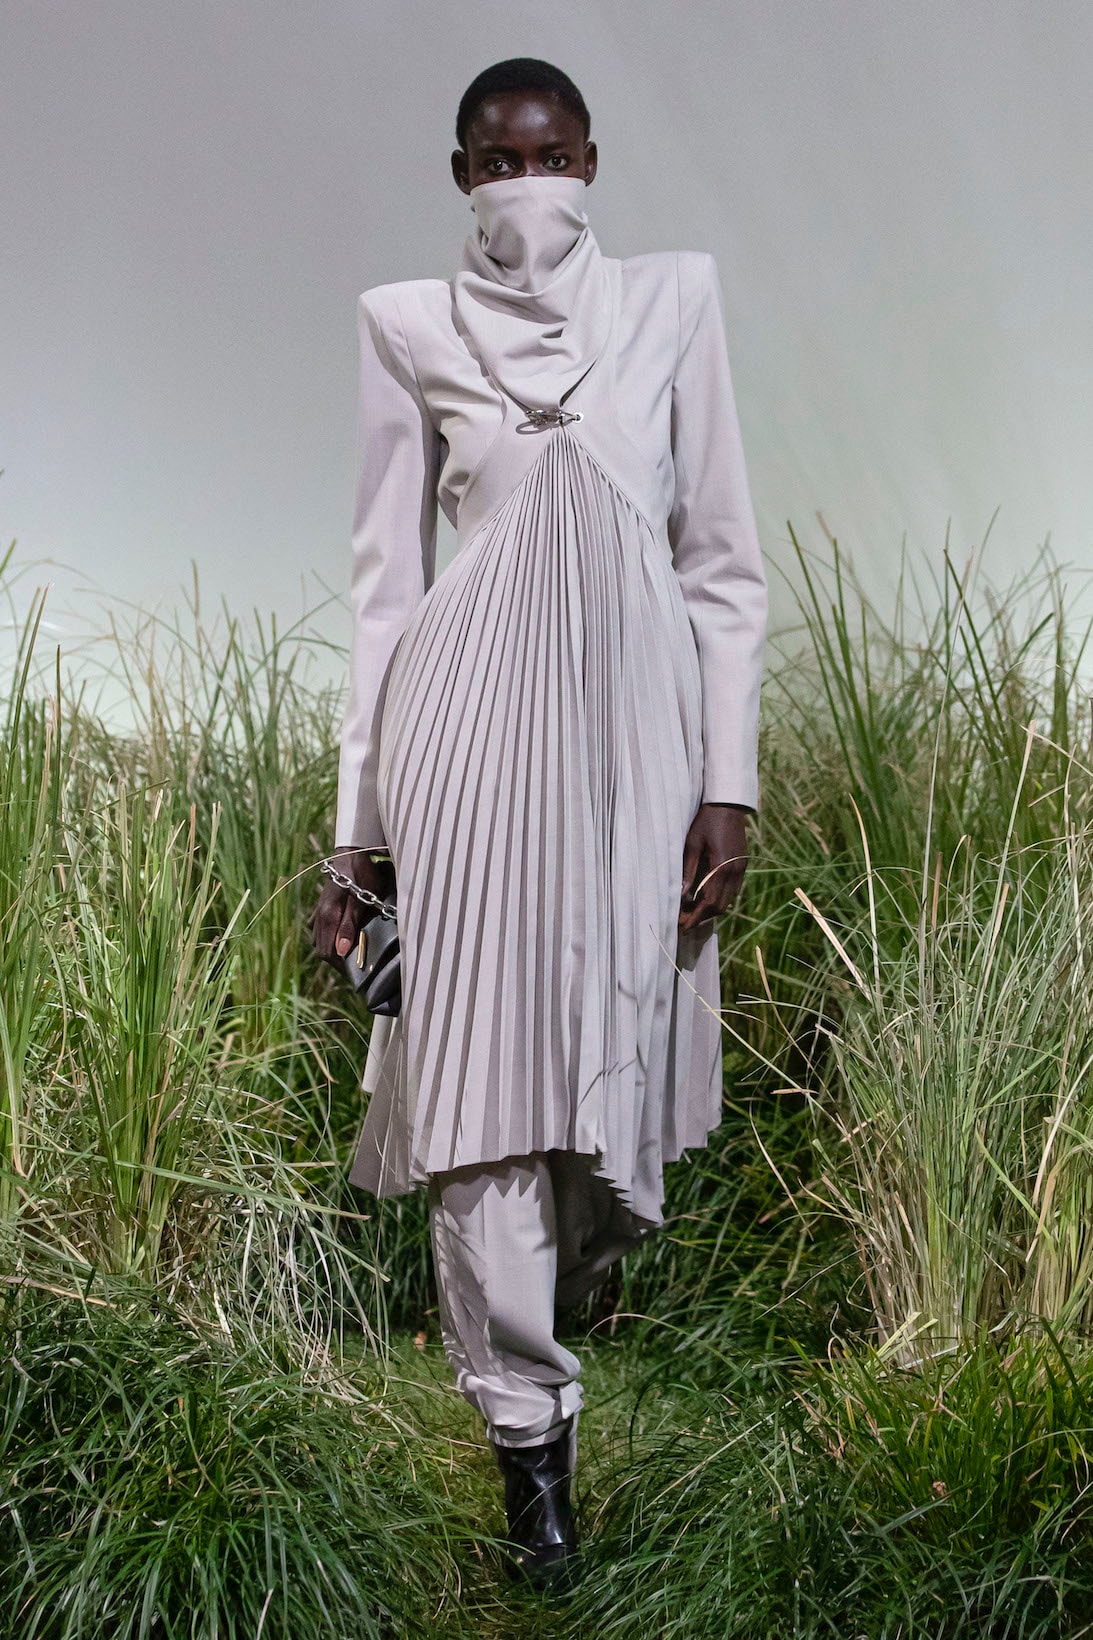 off white virgil abloh spring summer adam is eve collection imaginary tv digital runway show dress gray pants bag boots